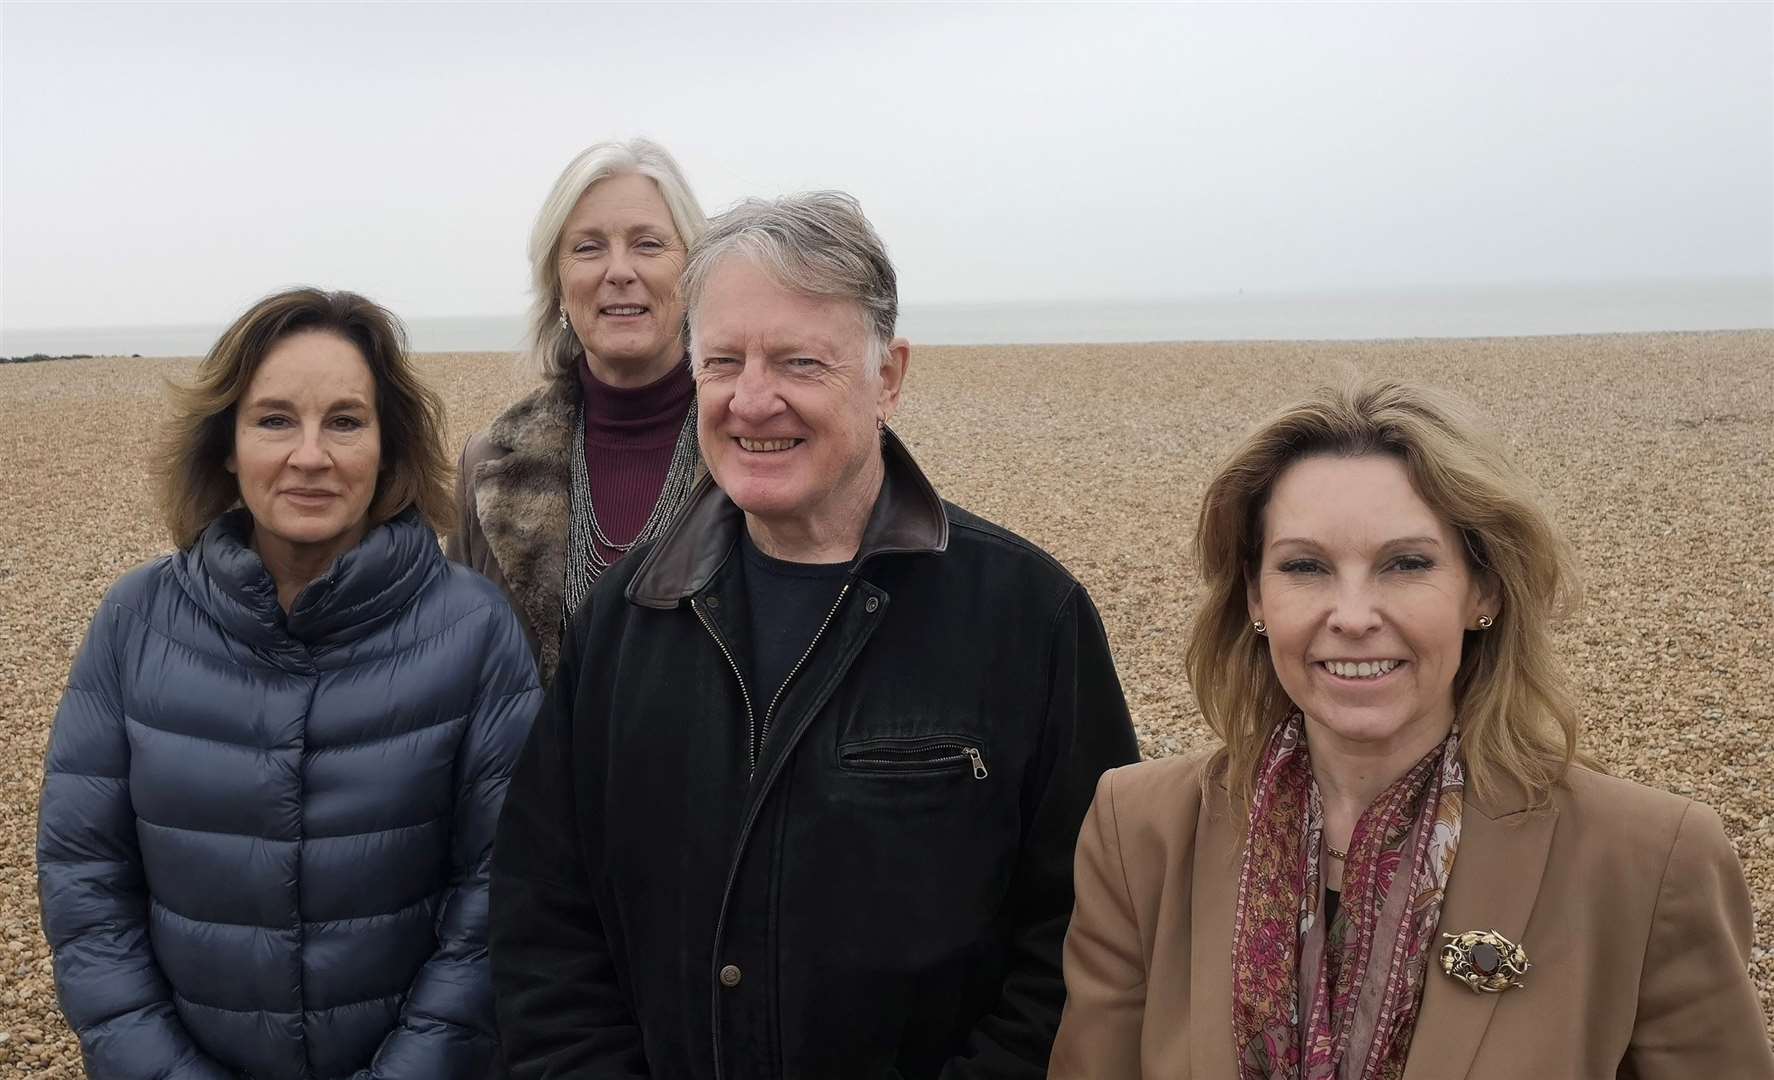 Mrs Elphicke with members of Goodwin Sands SOS. Picture: The Office of Natalie Elphicke MP